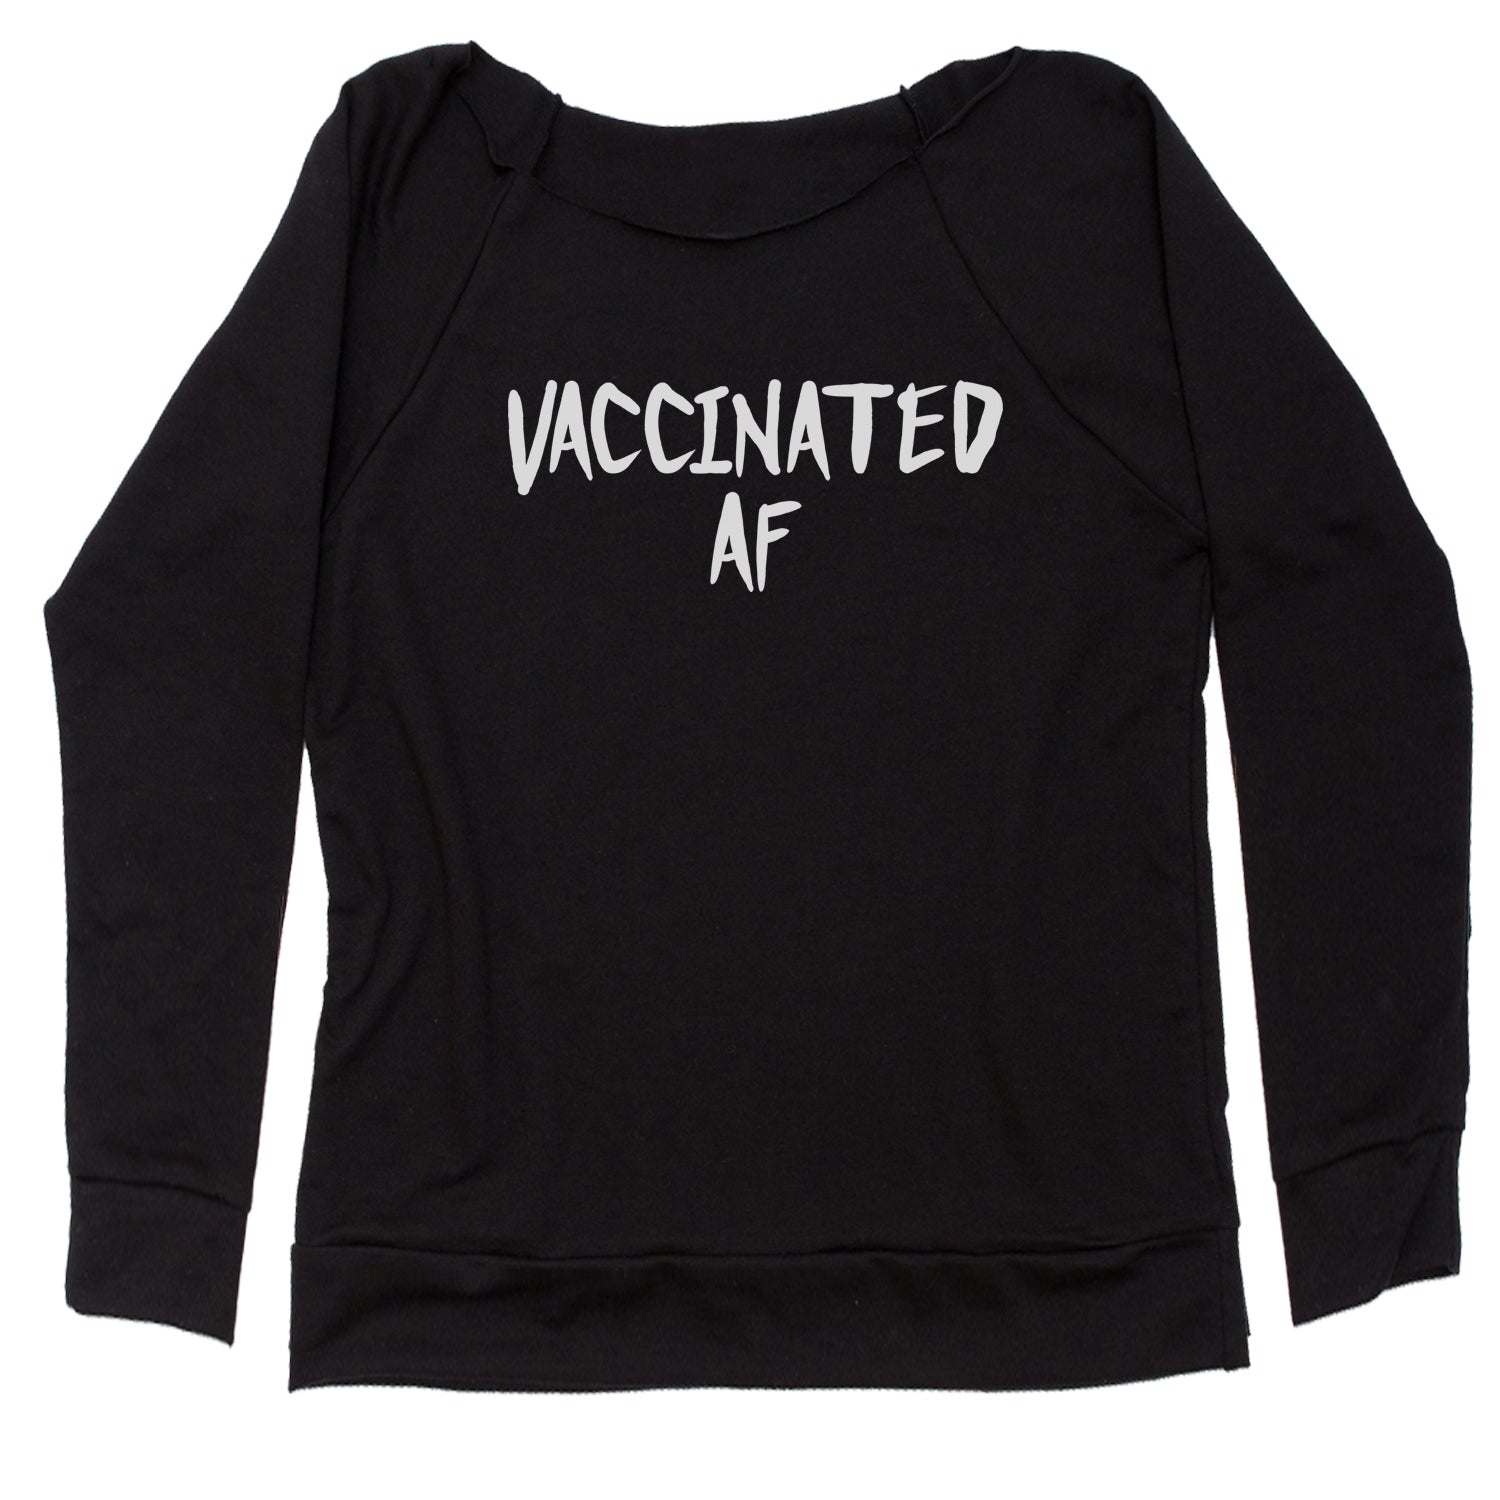 Vaccinated AF Pro Vaccine Funny Vaccination Health Slouchy Off Shoulder Sweatshirt moderna, pfizer, vaccine, vax, vaxx by Expression Tees